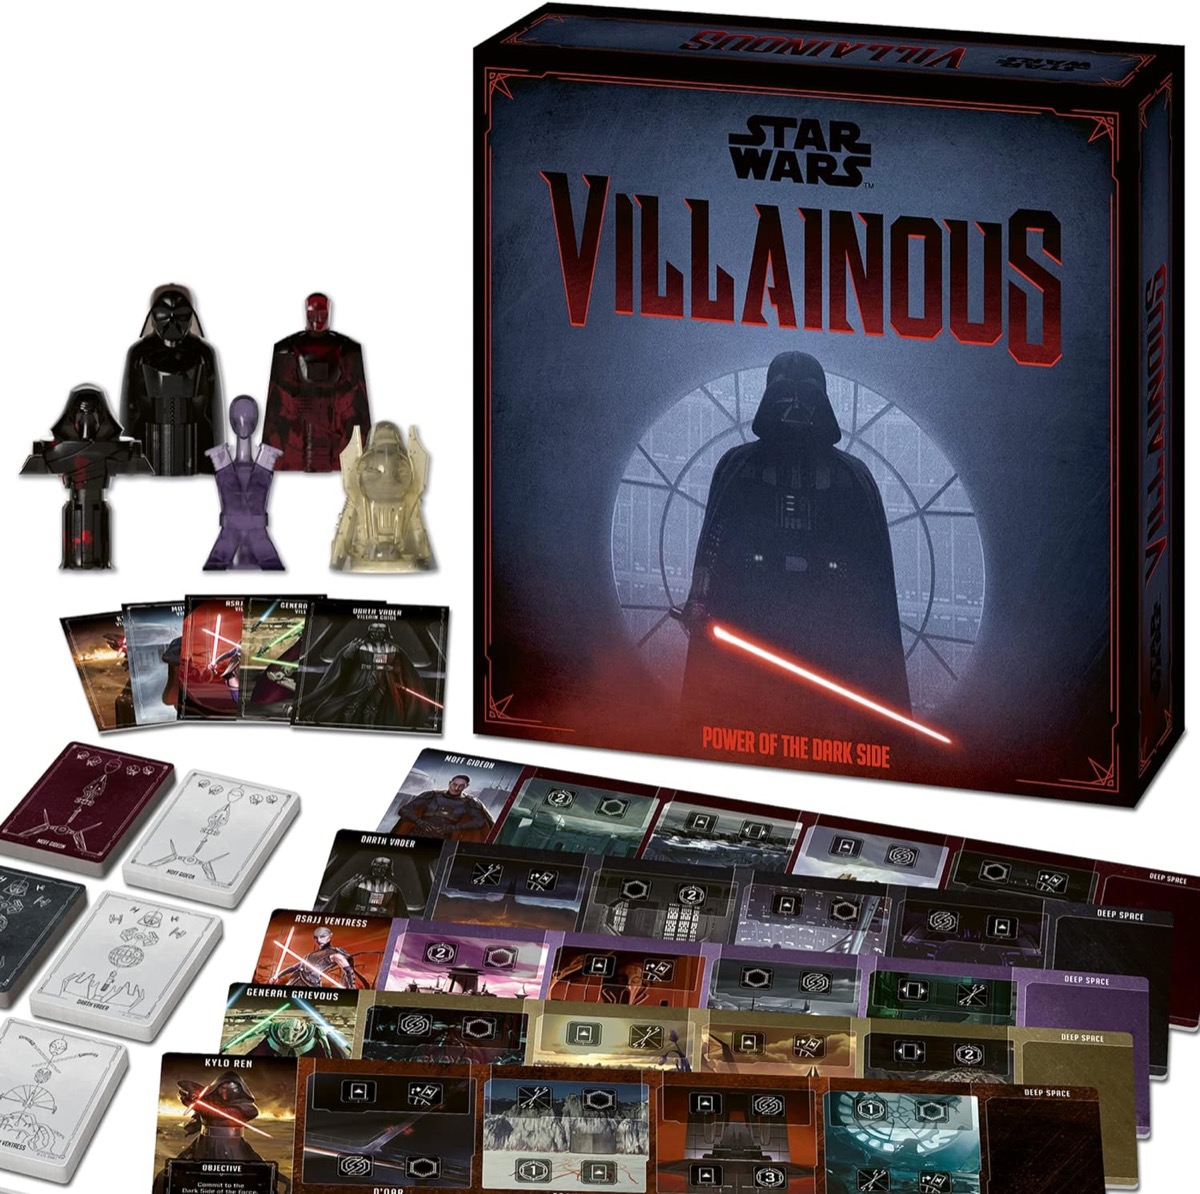 A box depicting Darth Vader and game pieces for Star Wars Villainous- Power of The Dark Side